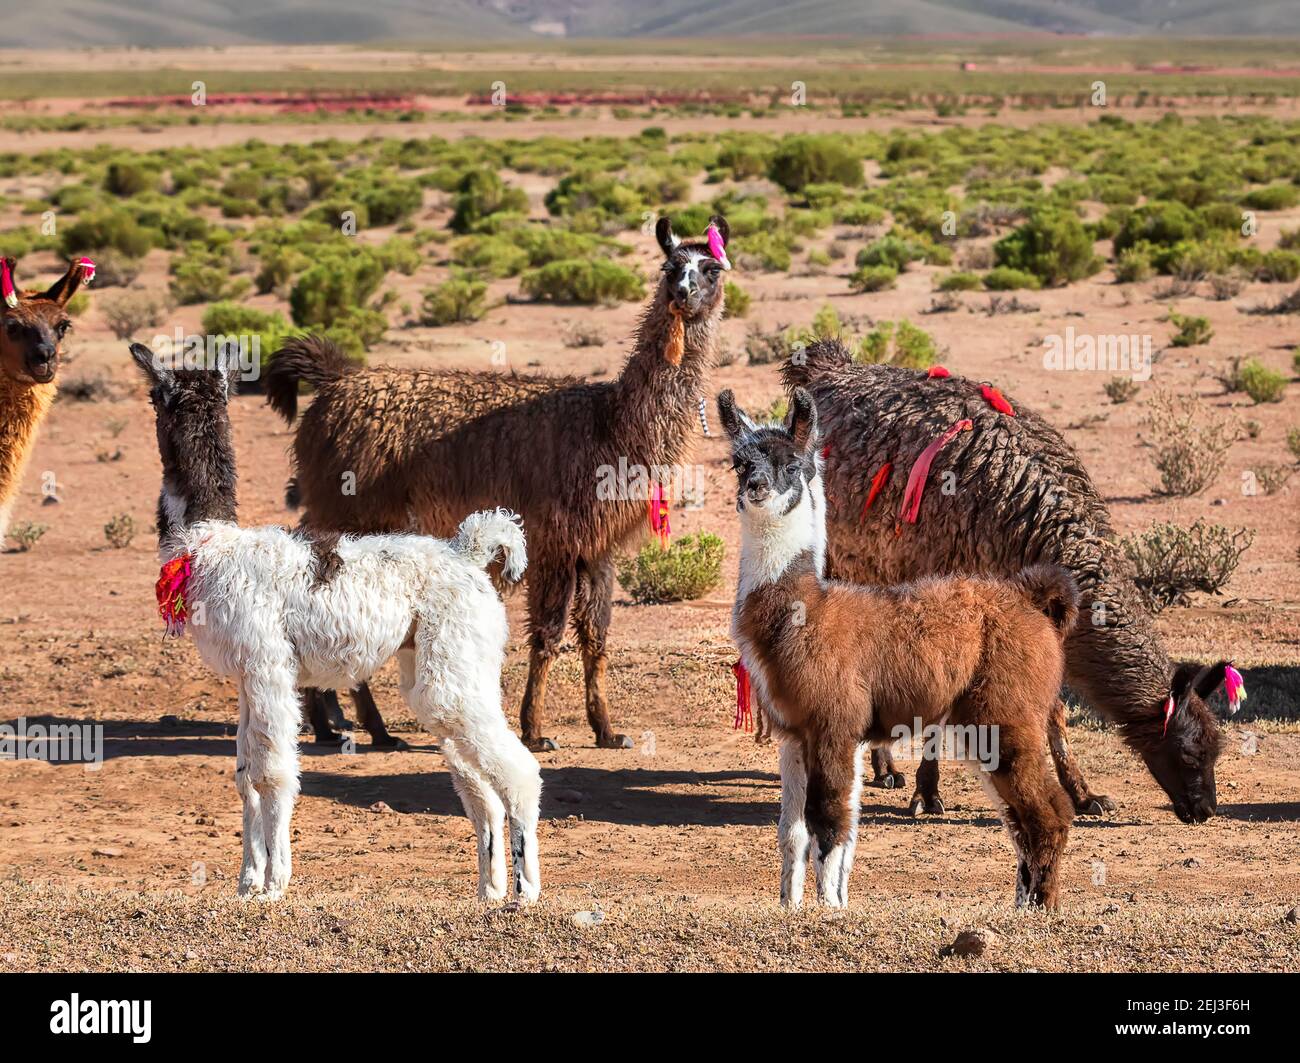 Herd of Llamas. Autumn desert landscape in the Bolivian Altiplano. Andes, South America Stock Photo